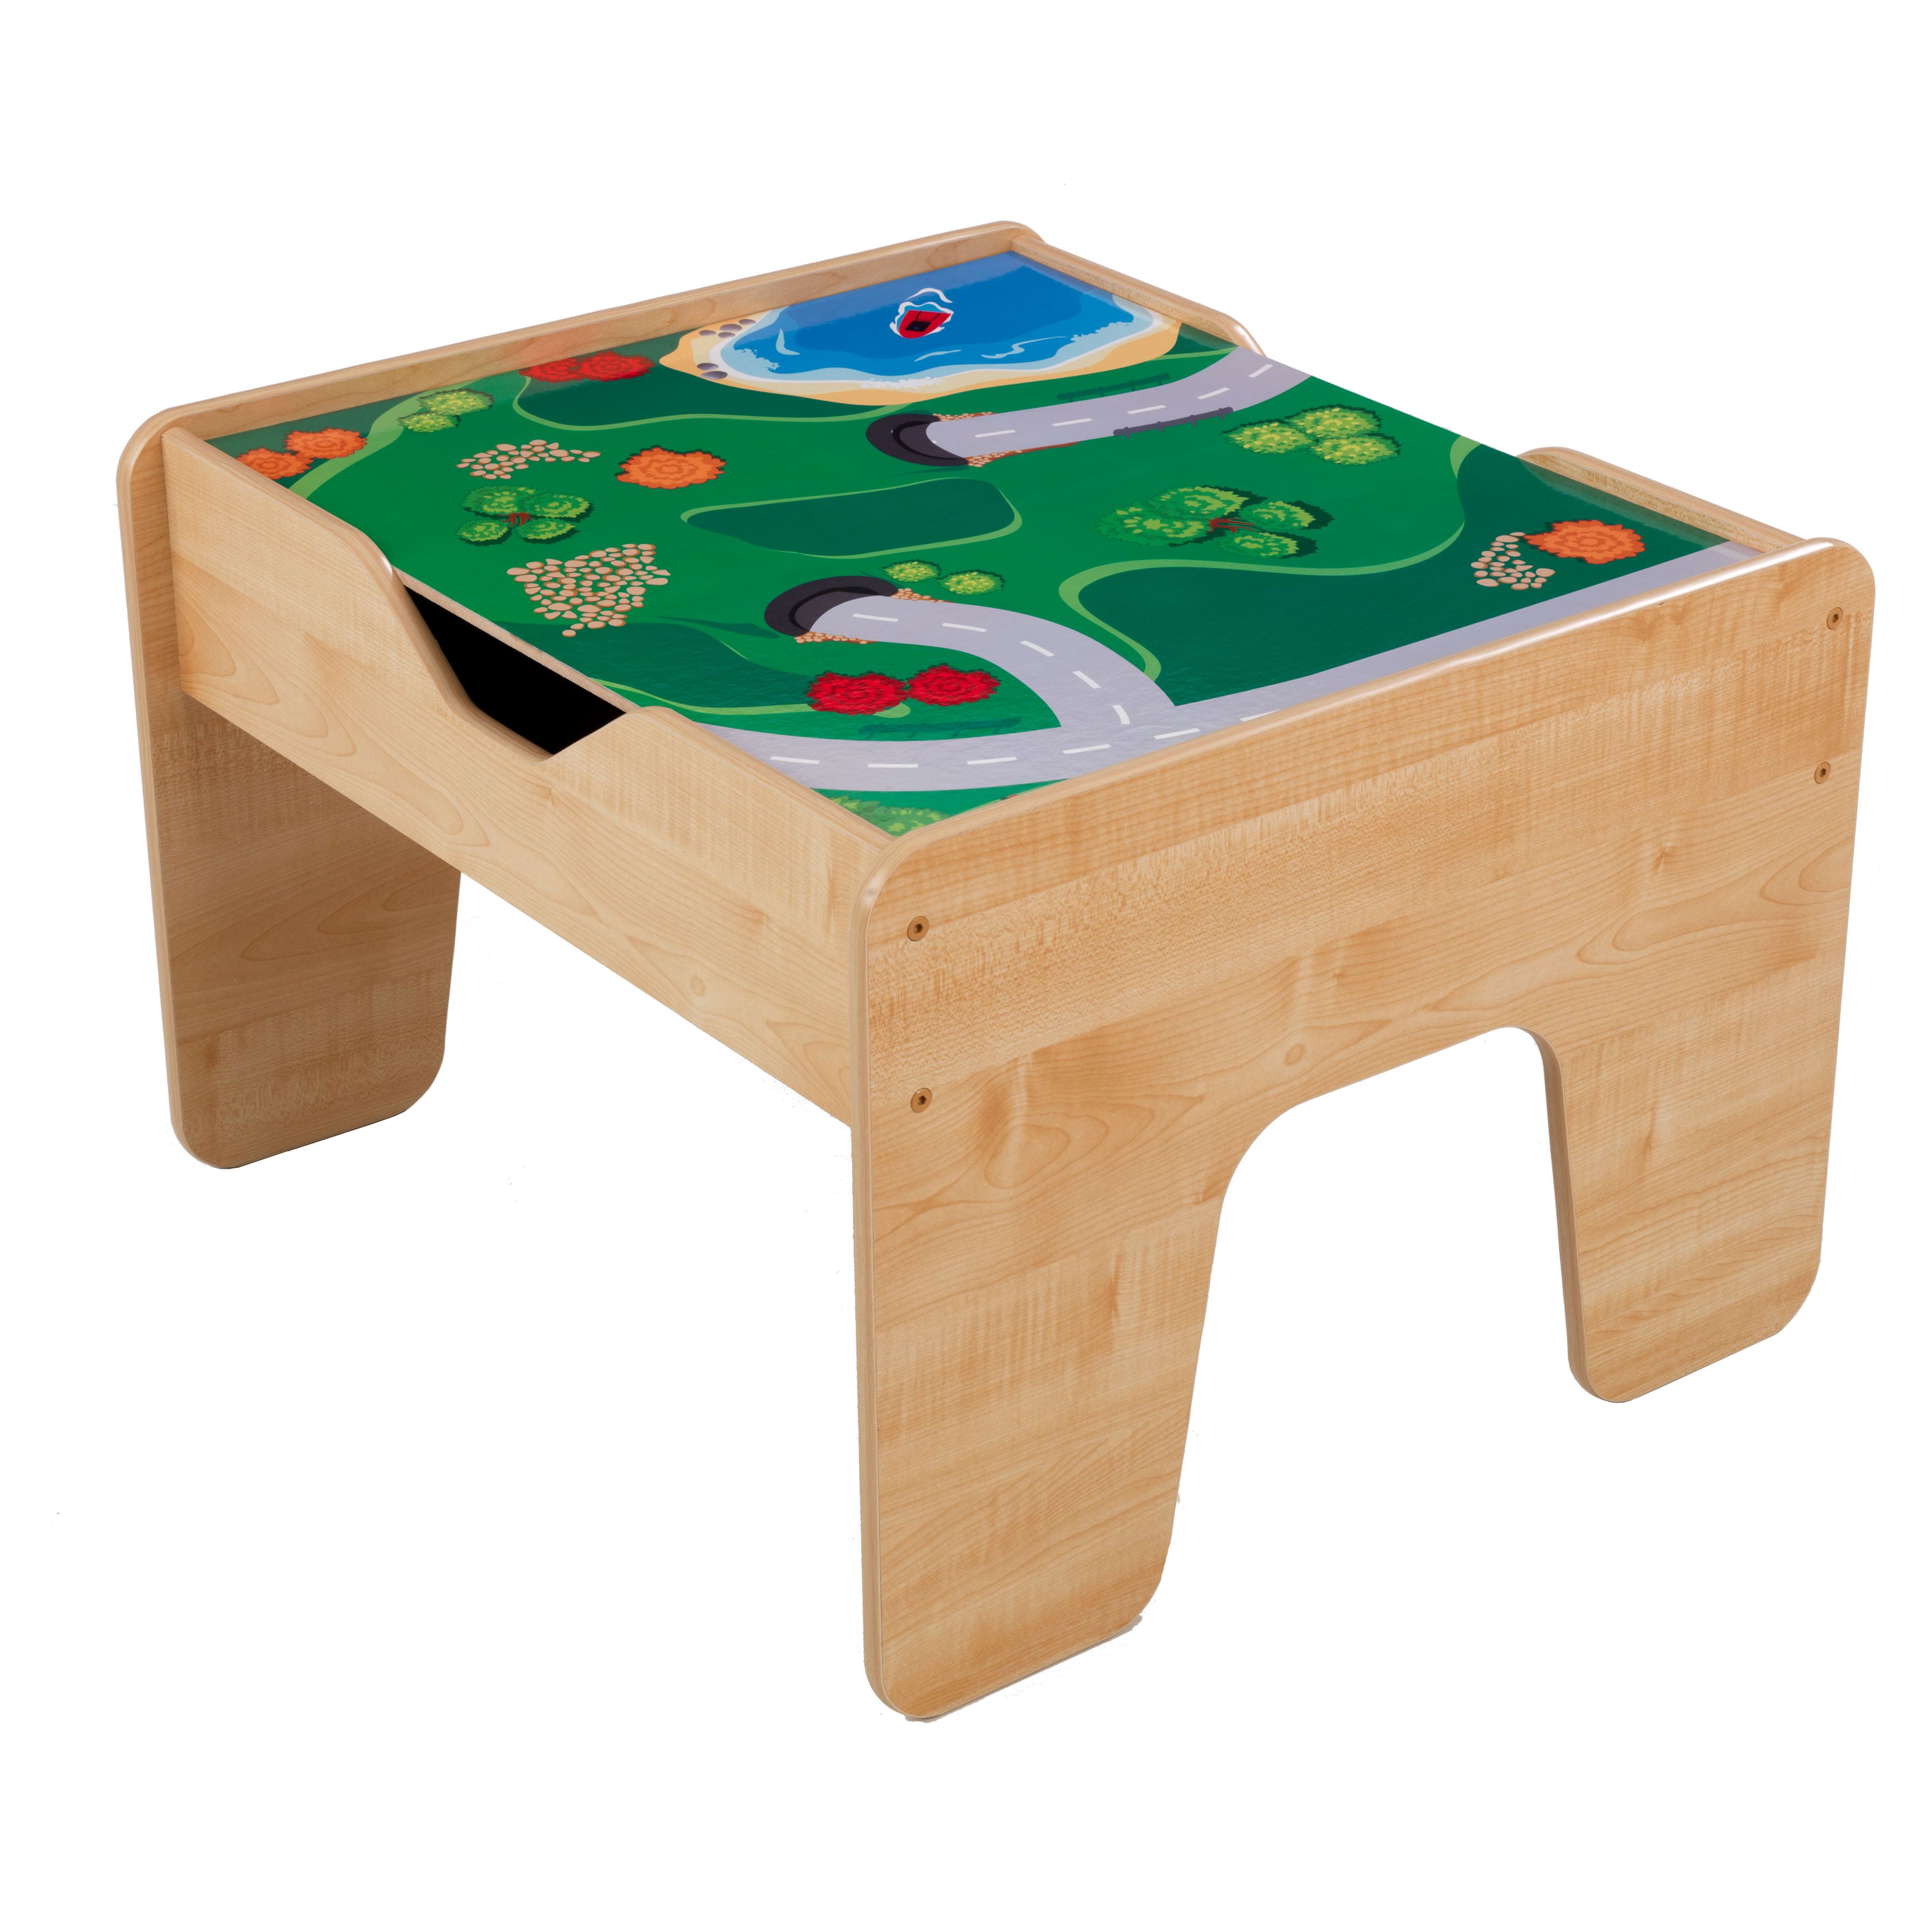 KidKraft 2 in 1 Activity Table with Board